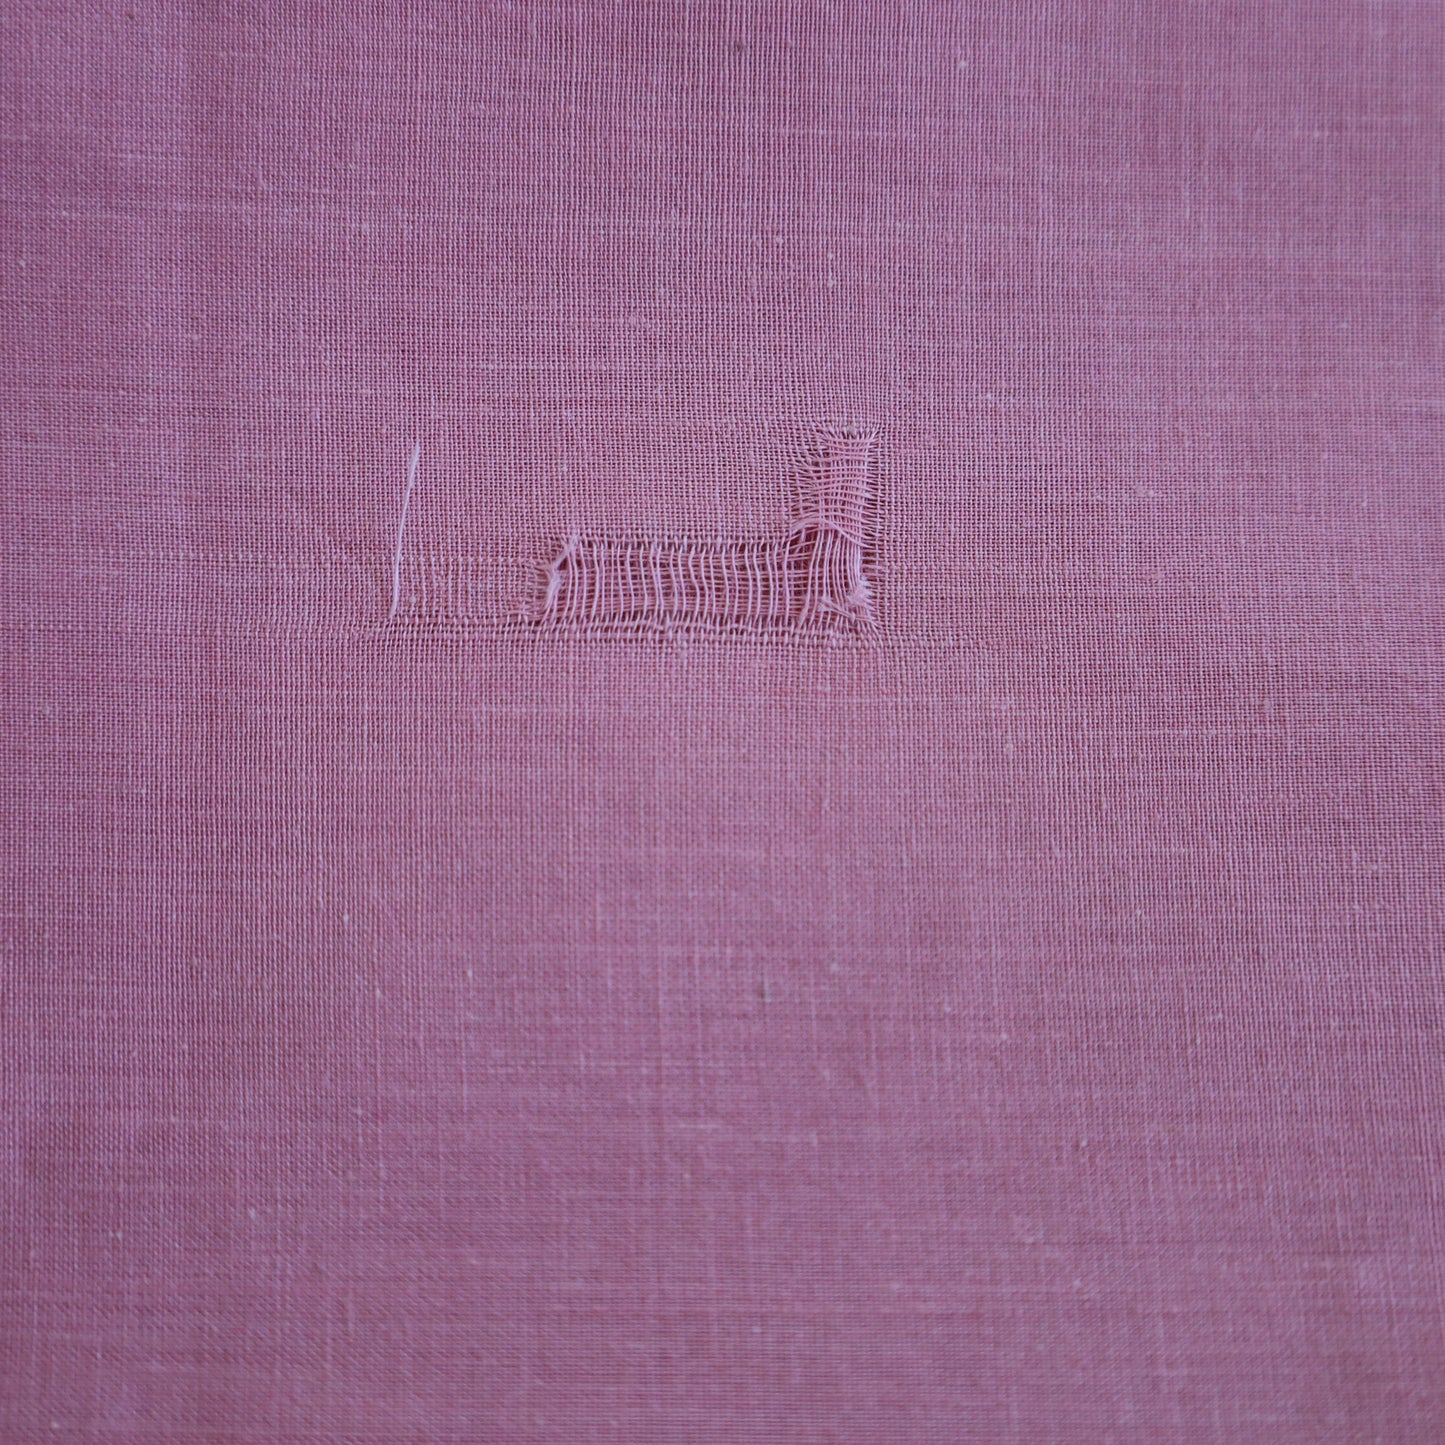 One-of-a-Kind Handloom Cotton Fabric - Pink Grey Contrast